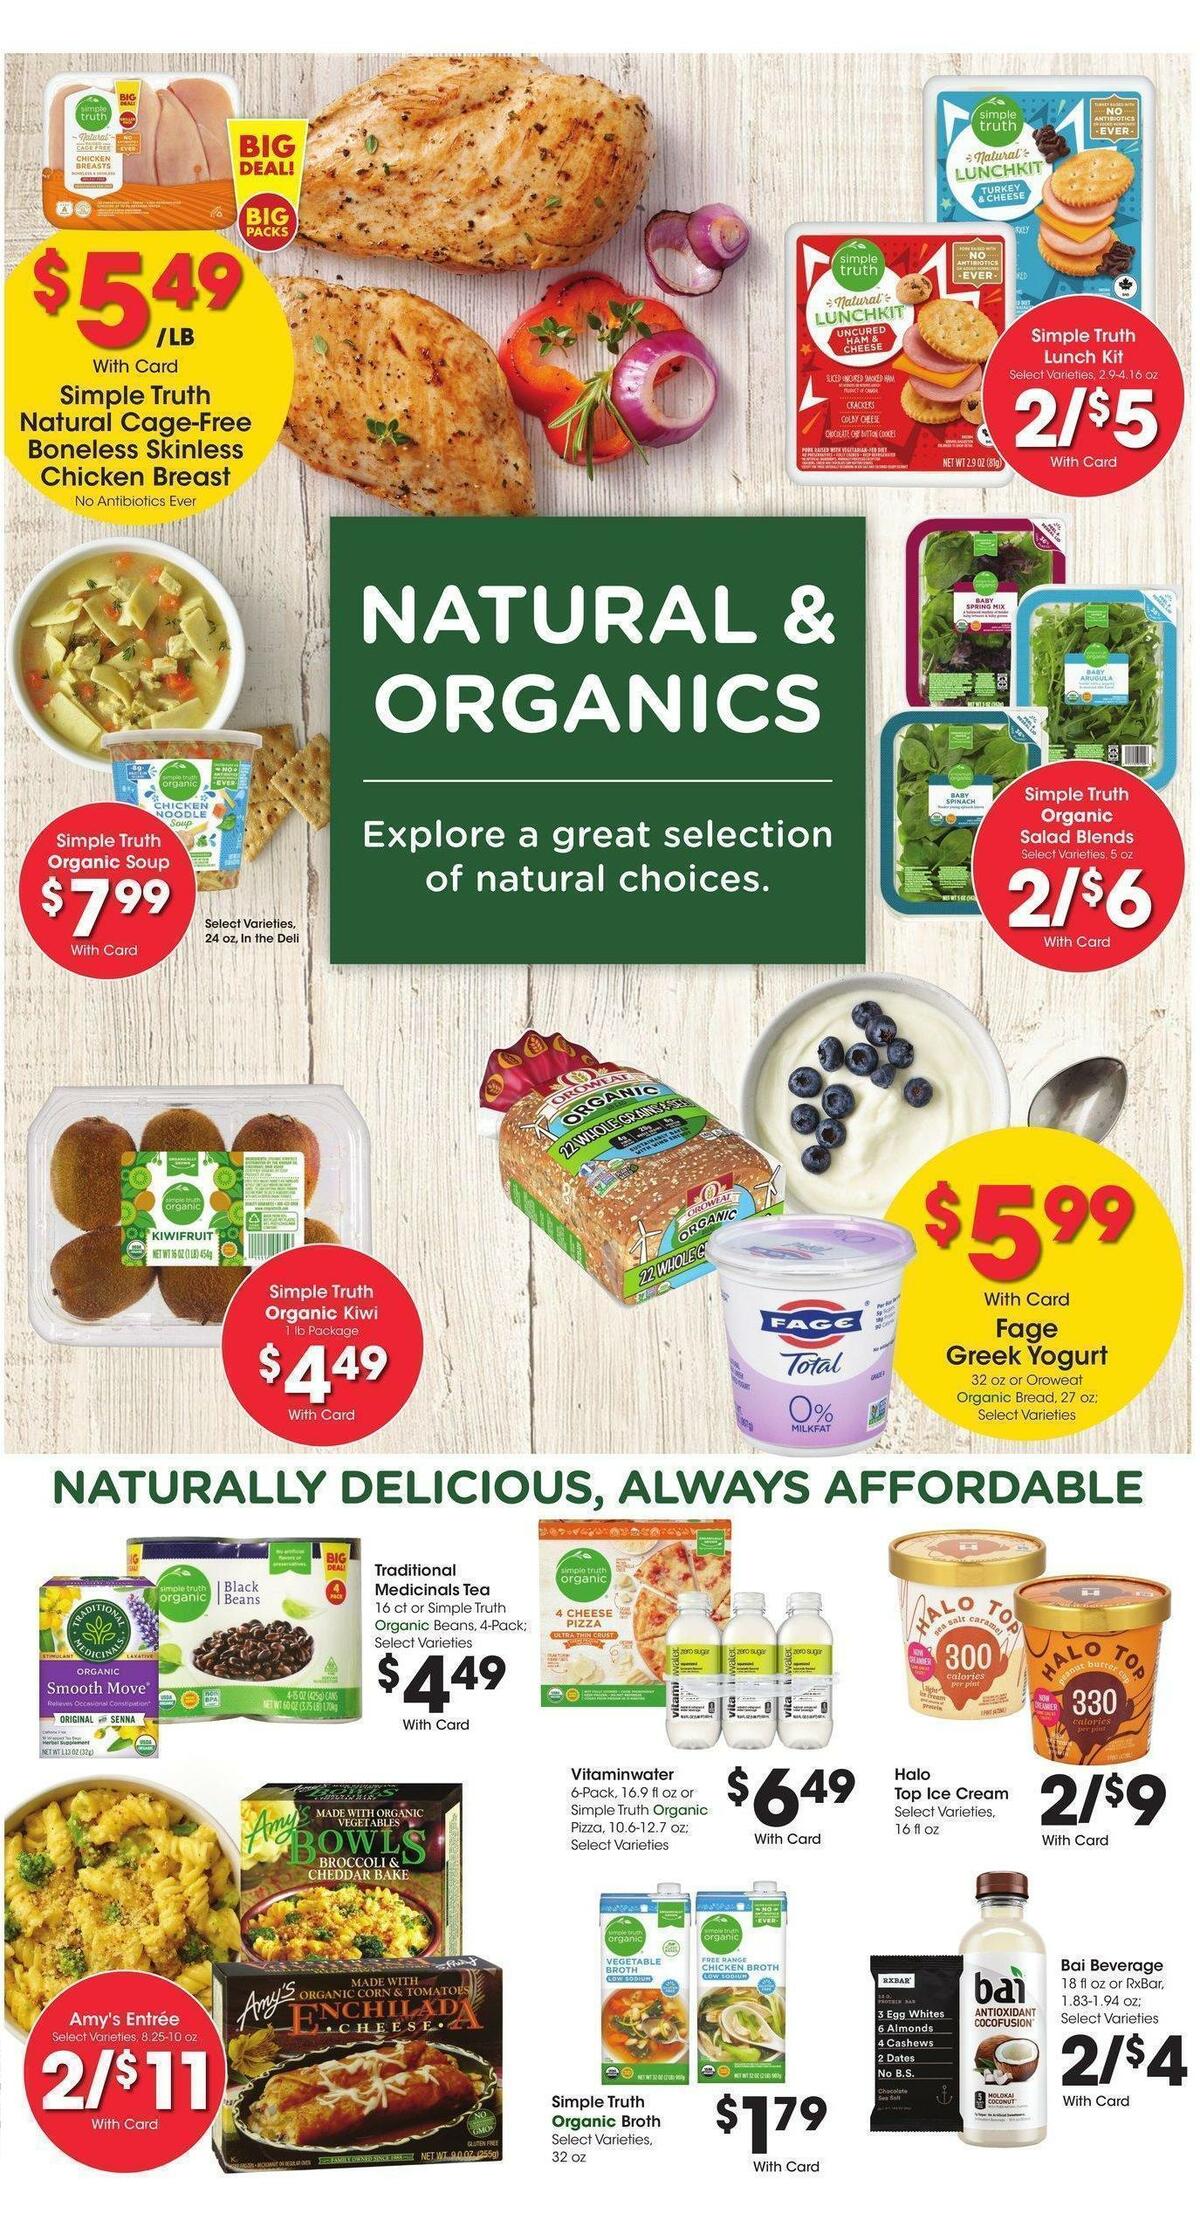 Kroger Weekly Ad from April 19